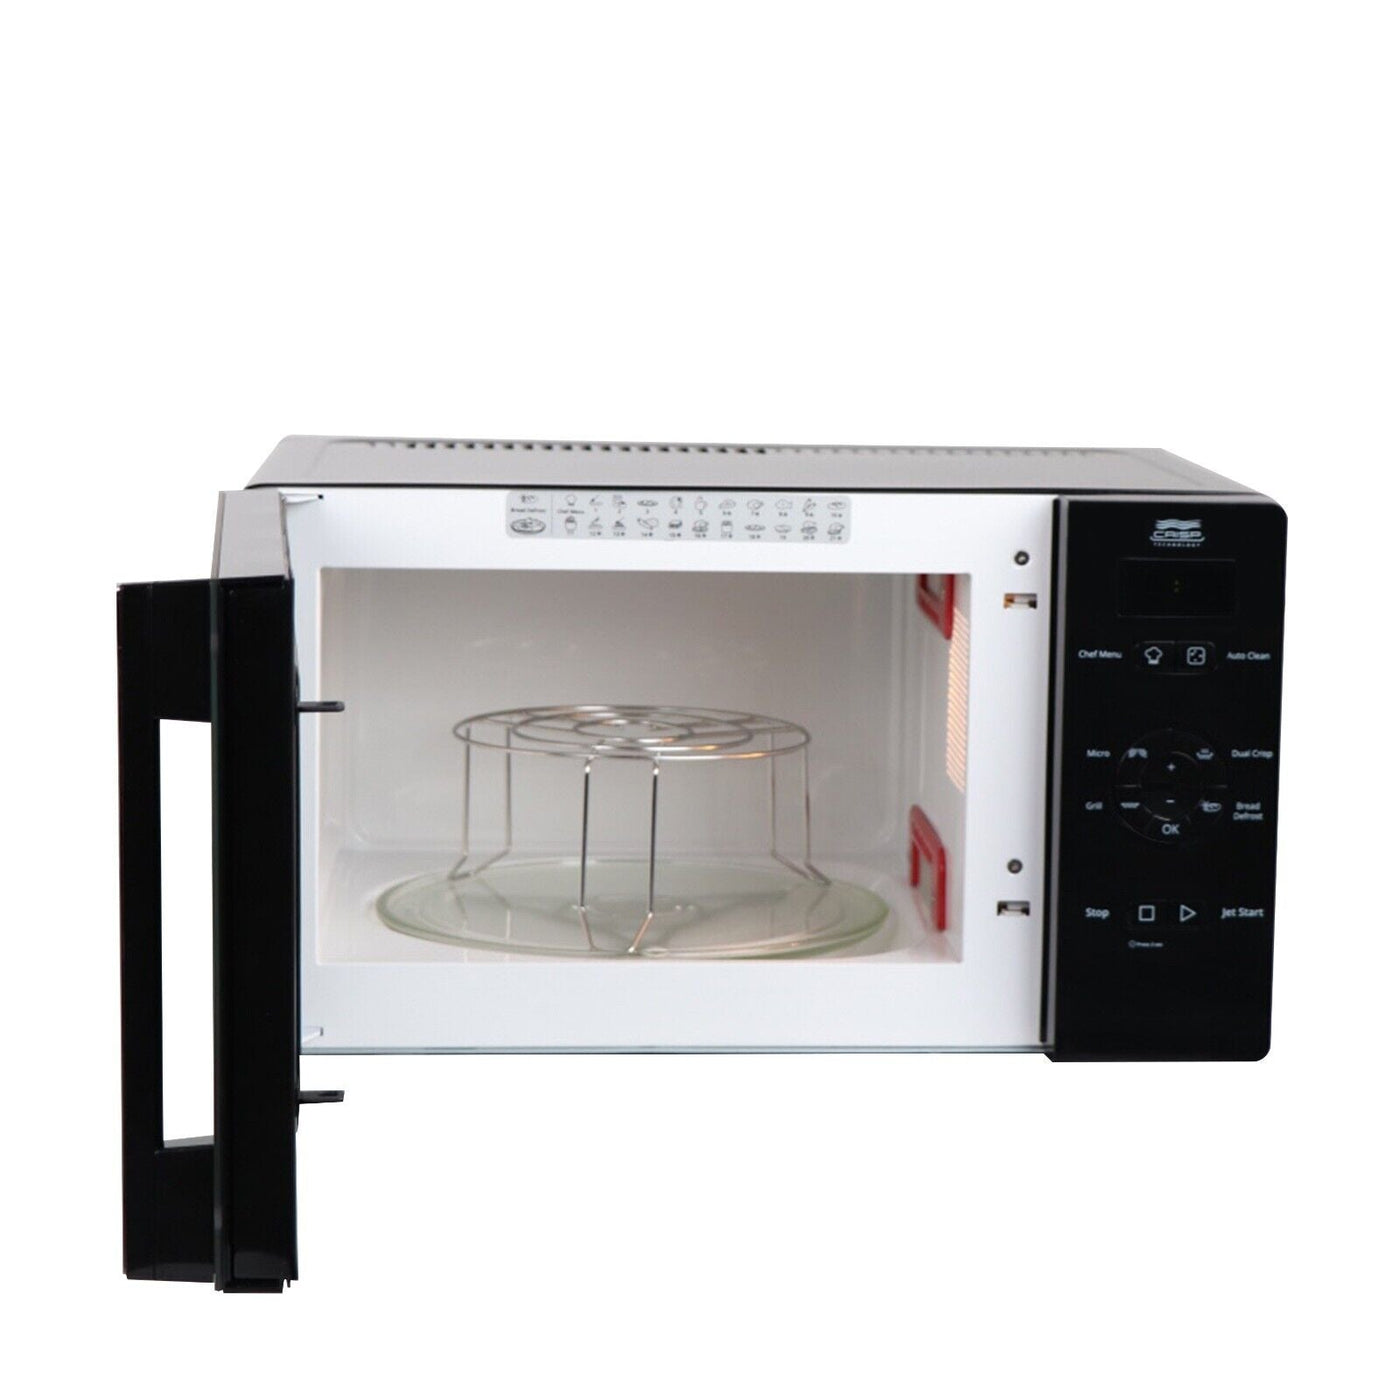 25L 800W Microwave Oven With Crisp & Grill In Black